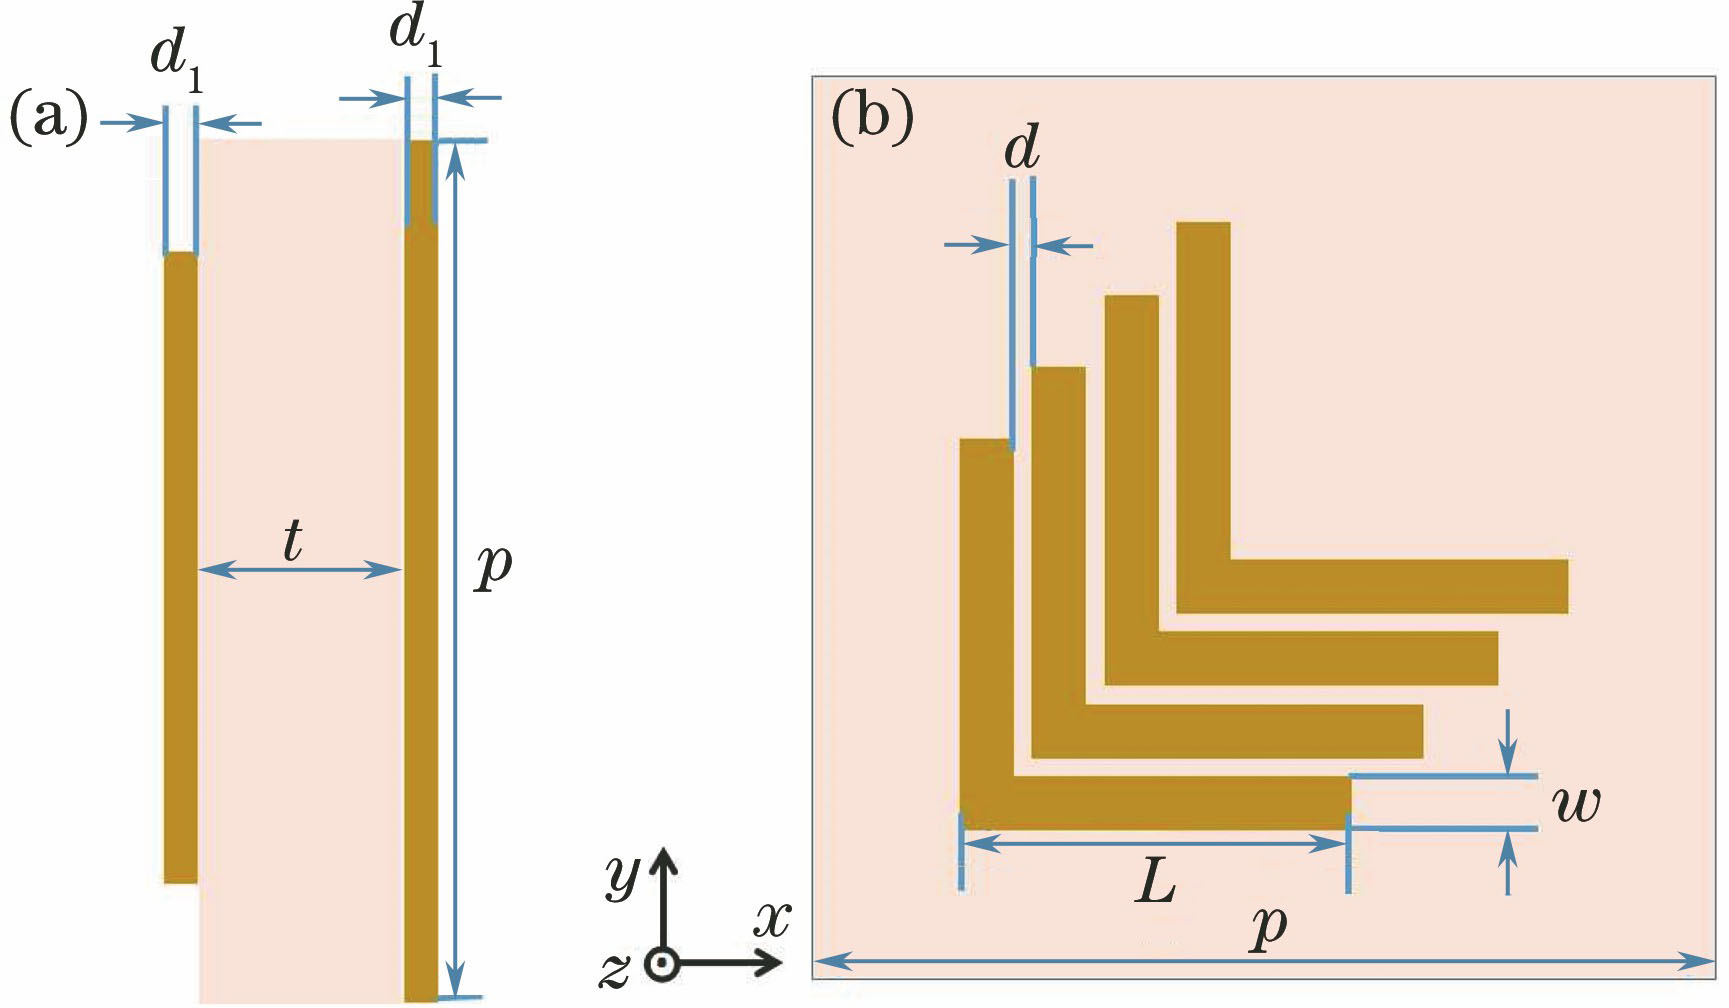 Unit cell of polarization converter based on metamaterial. (a) Side view; (b) front view